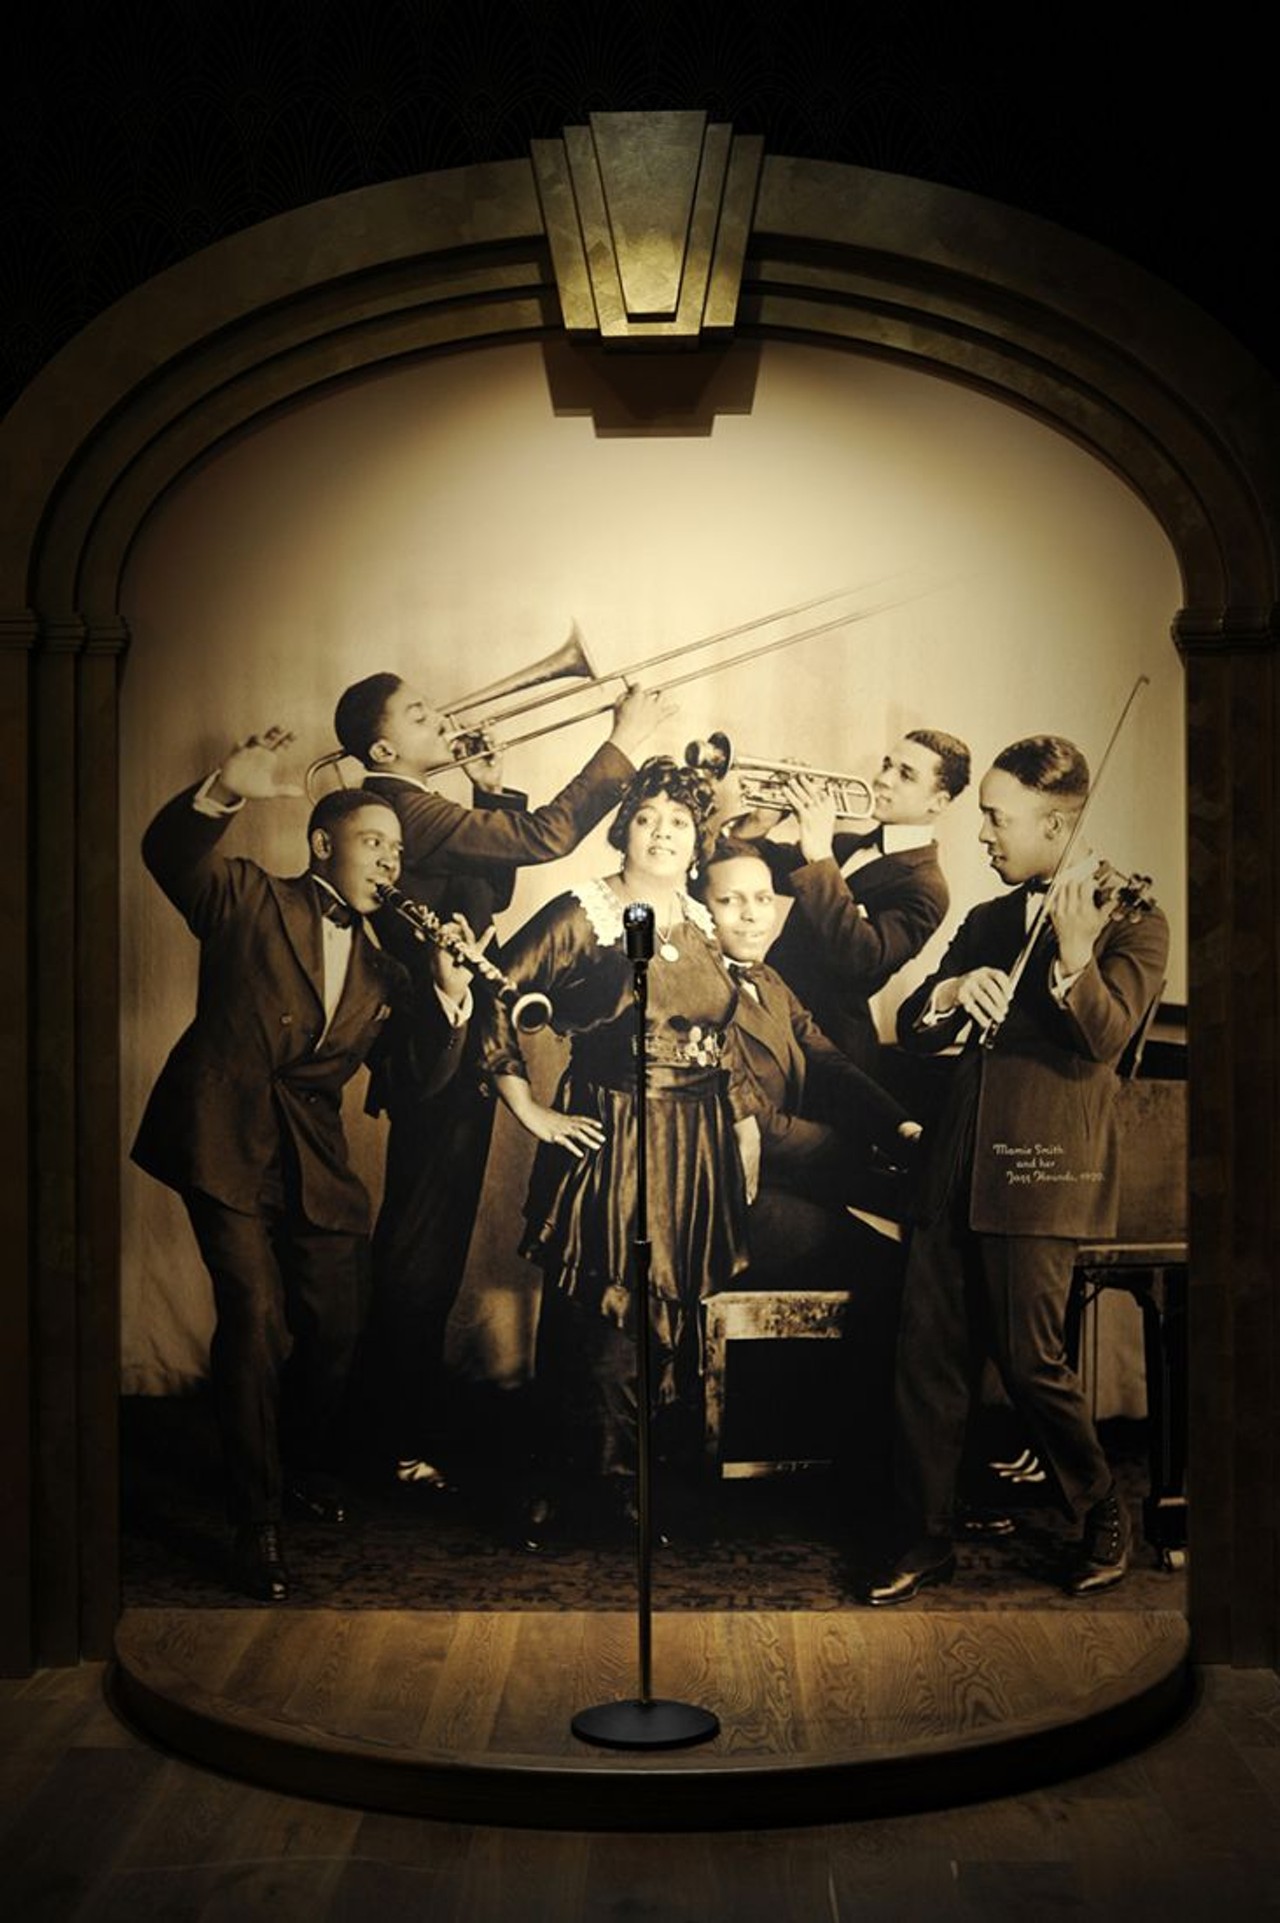 For anyone who has dreamed of becoming a blues legend, this part of the museum is for you. In the Women in Blues section, you'll find this display of Mamie Smith and Her Jazz Hounds. You're invited to take a photo with the Jazz Hounds and pretend to give your most passionate performance.